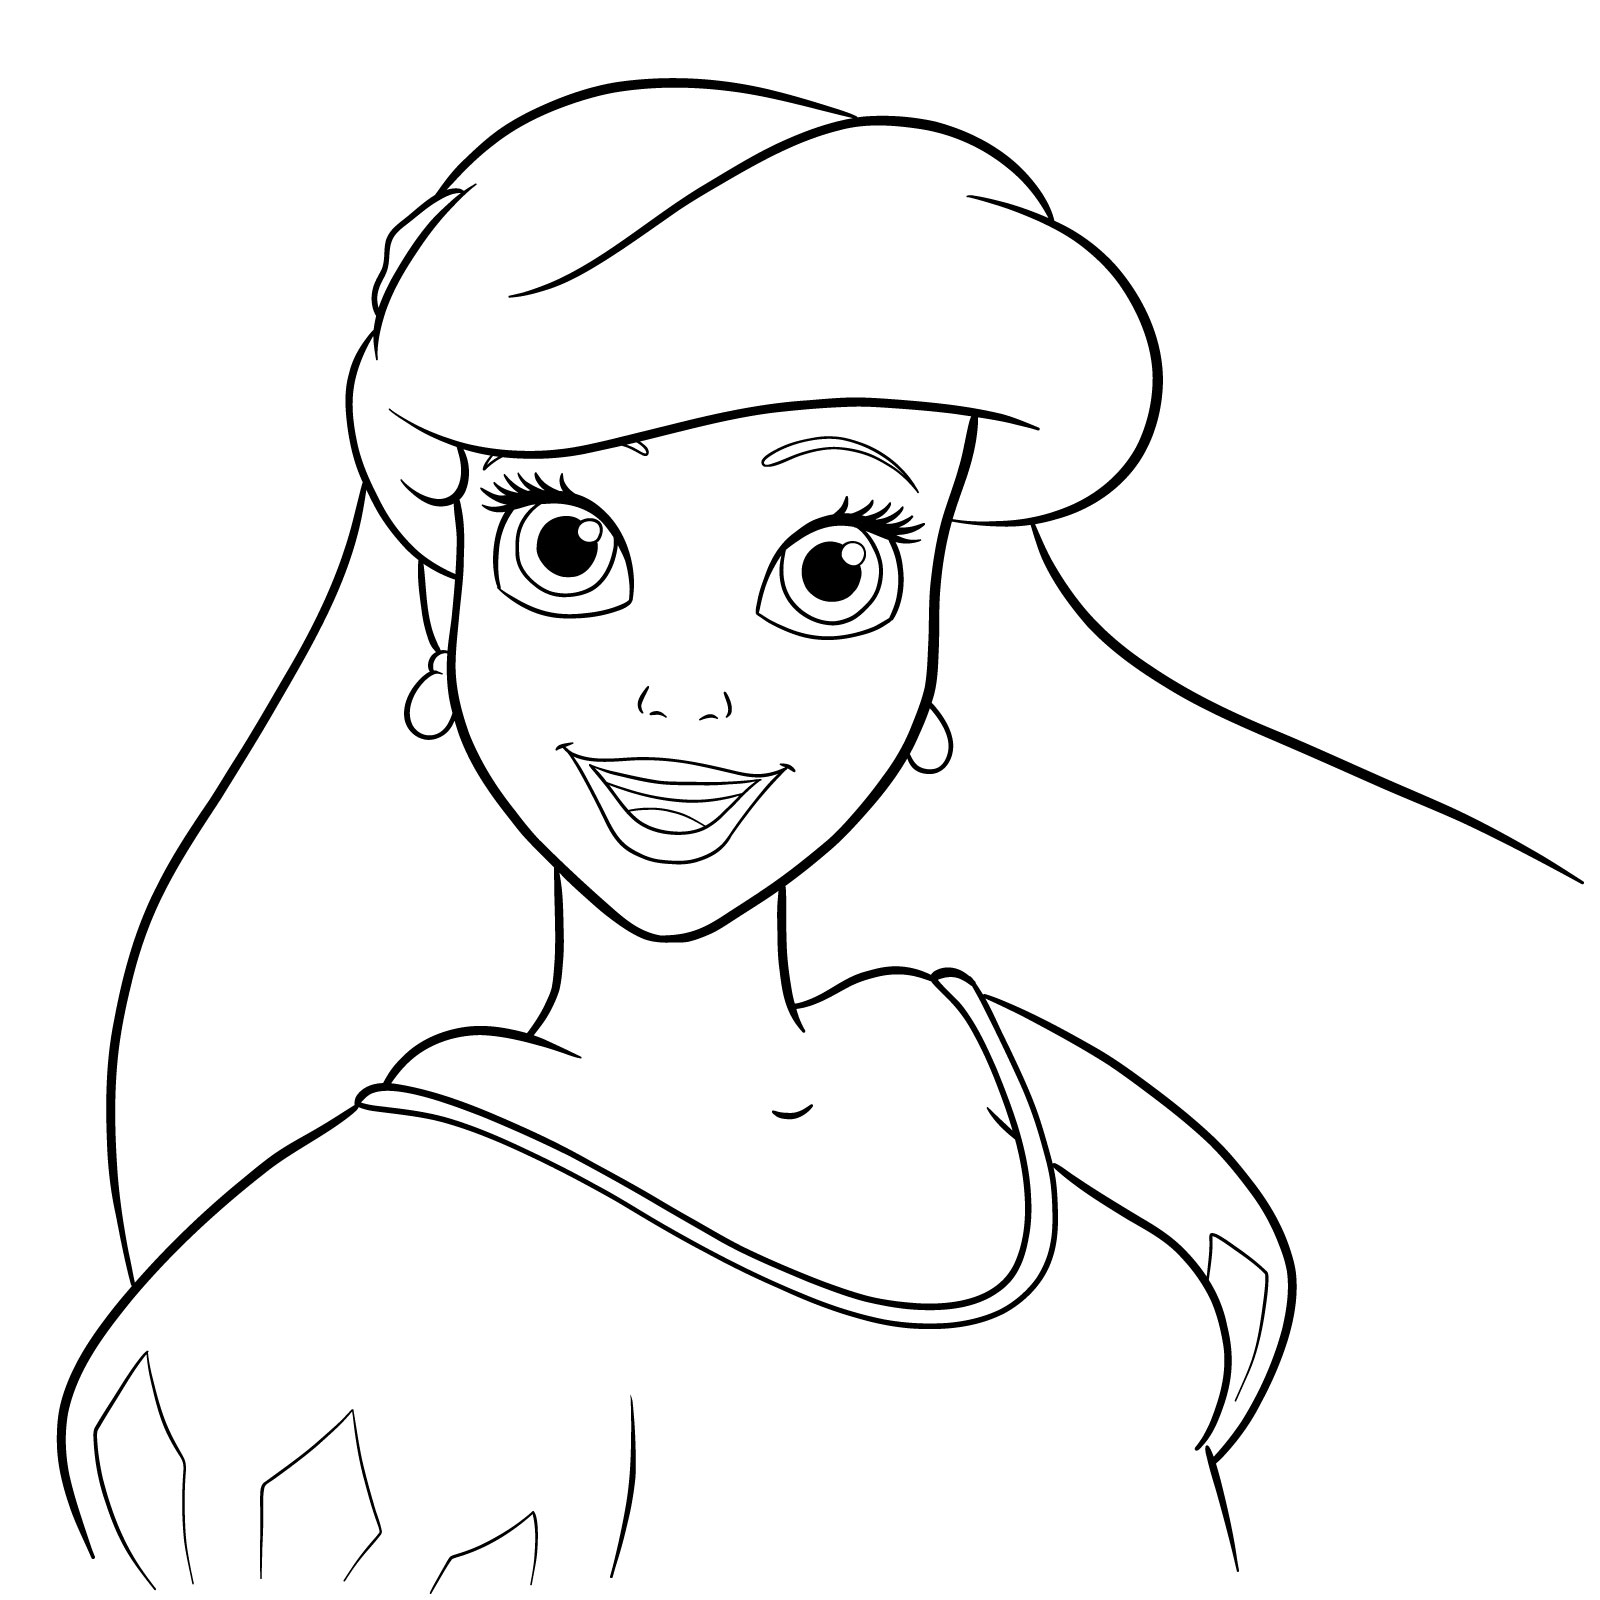 How to draw Ariel's face - The Little Mermaid - step 28